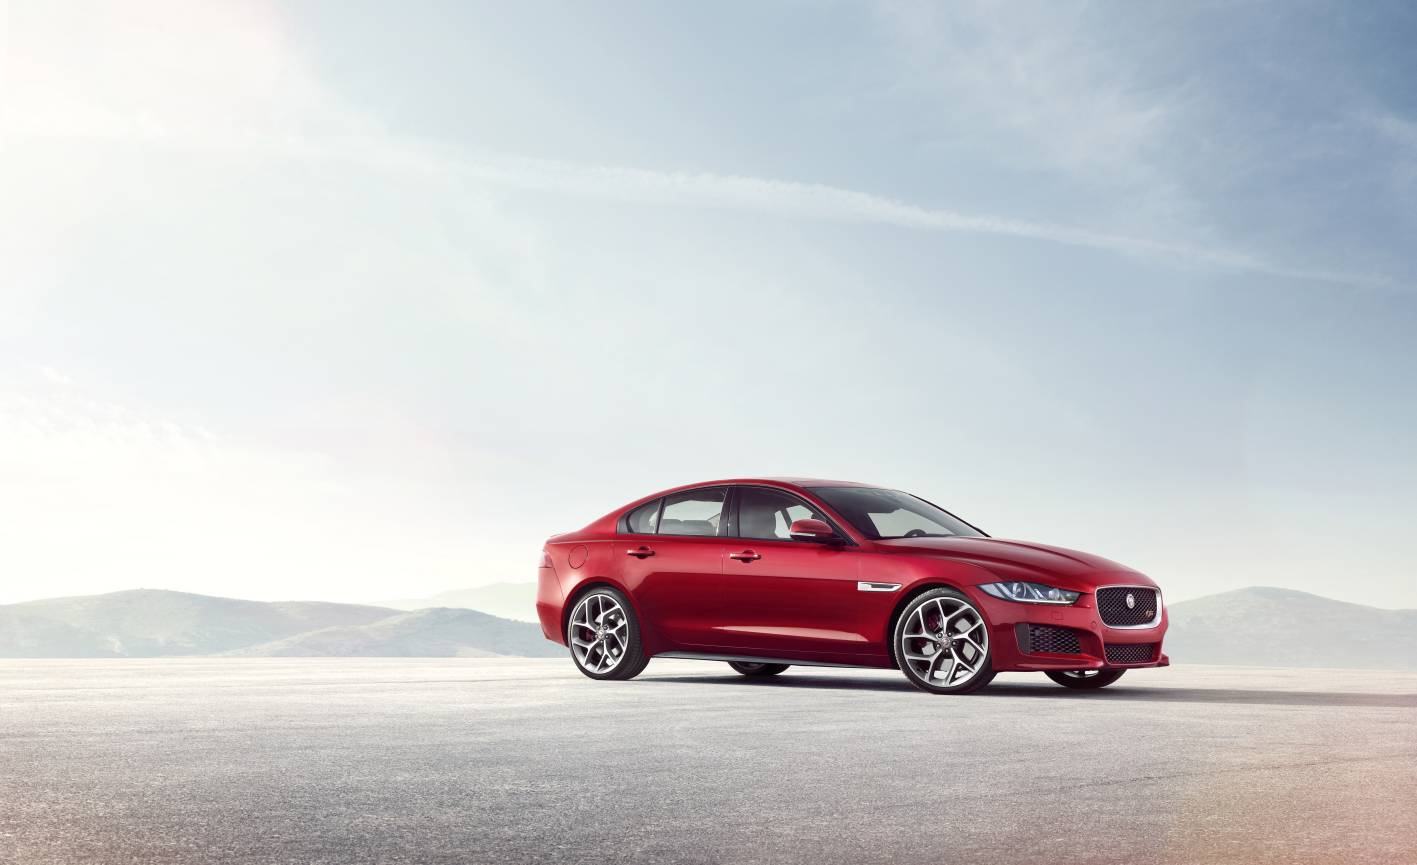 Jaguar Cars - News: all-new XE goes official